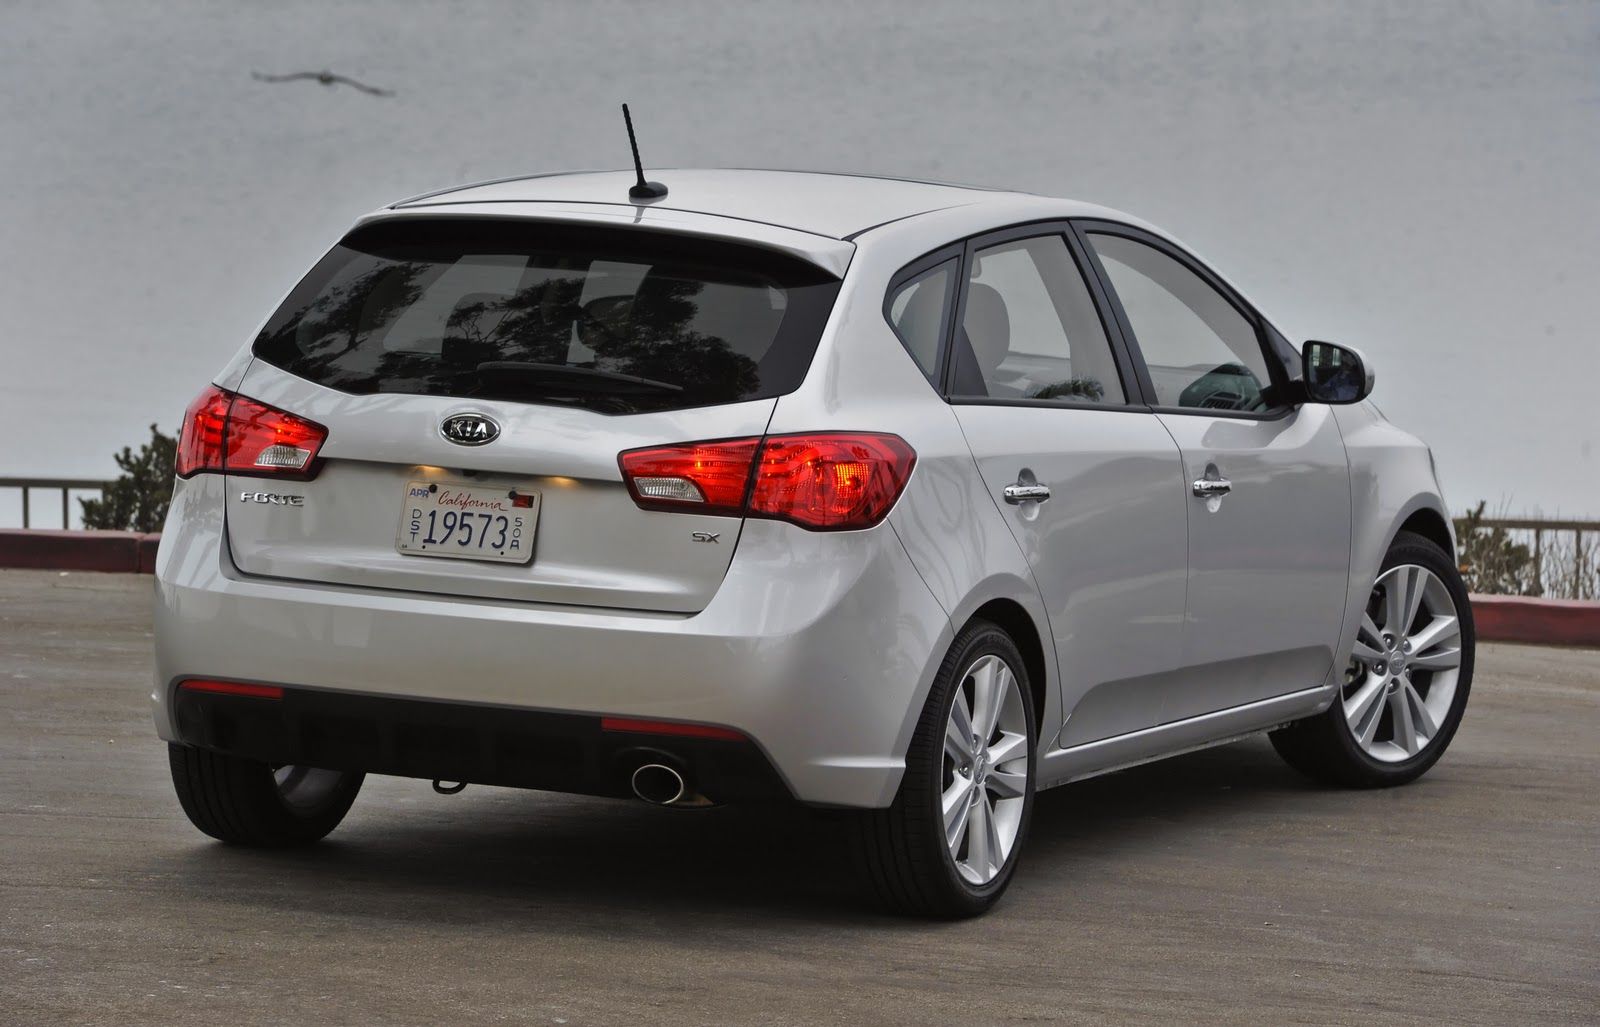 JeffCars.com:Your Auto Industry Connection: 2011 Kia Forte SX Hatchback ...